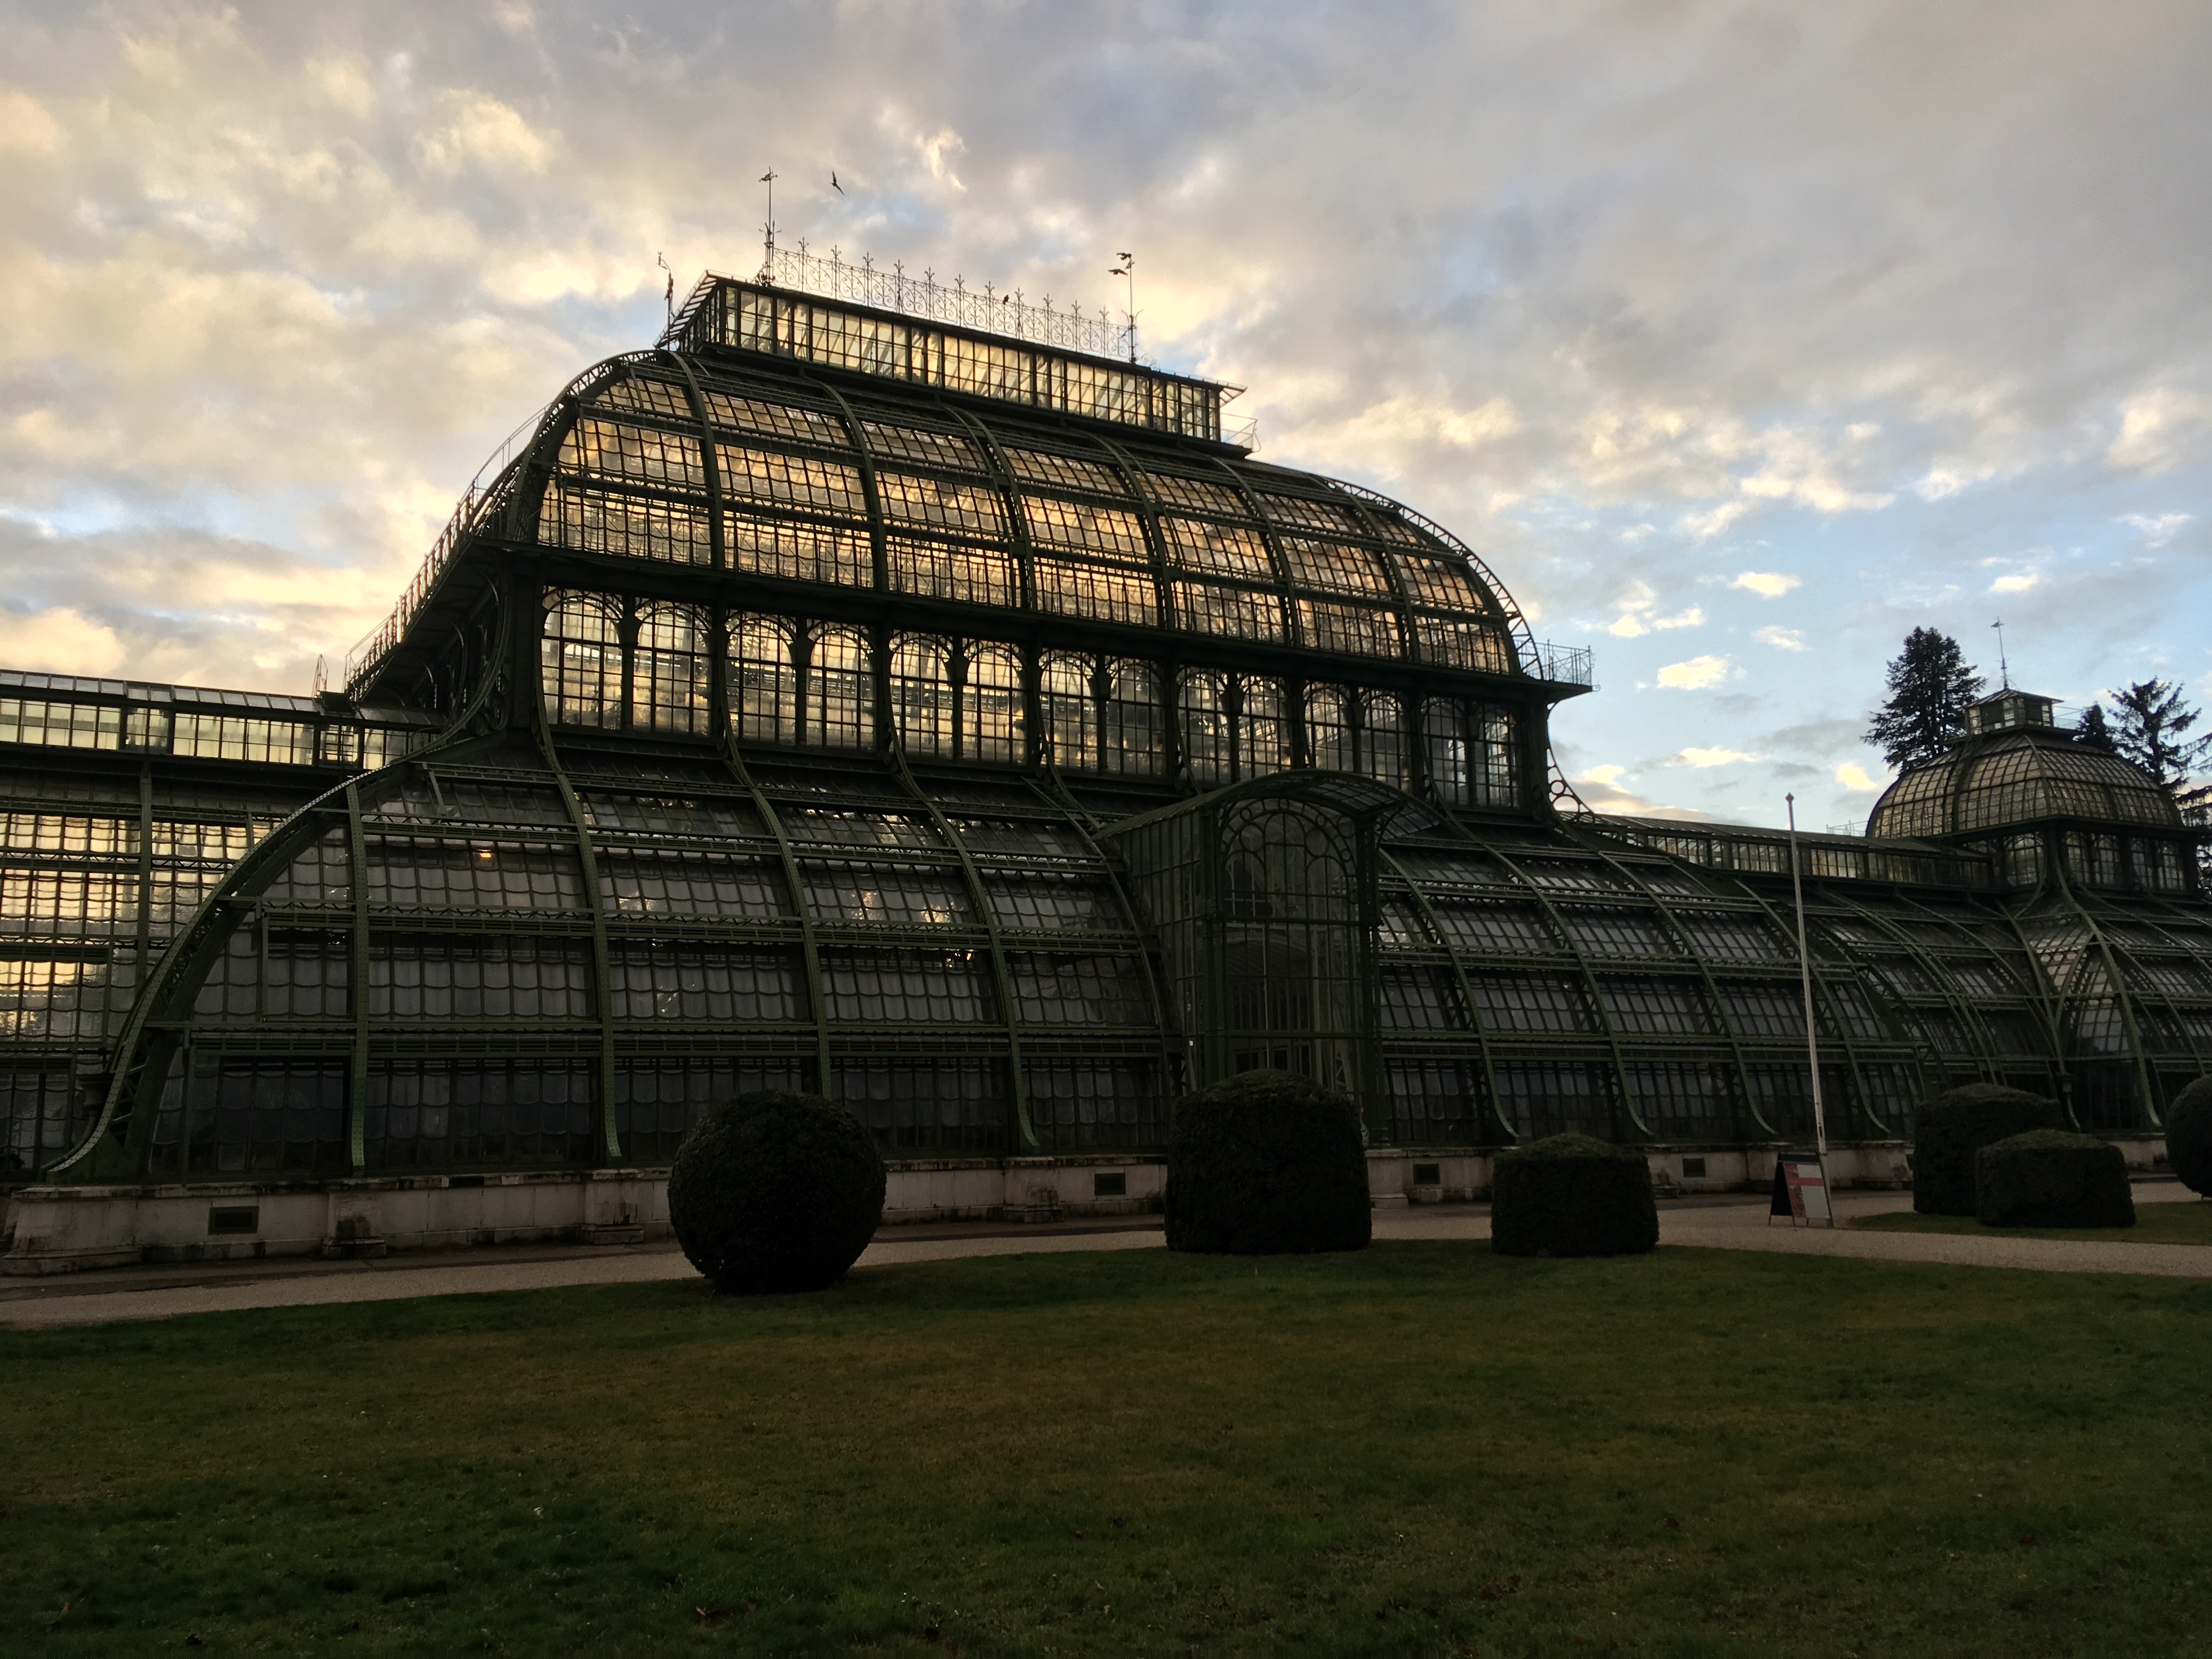 The exterior of a green house in a park in Vienna